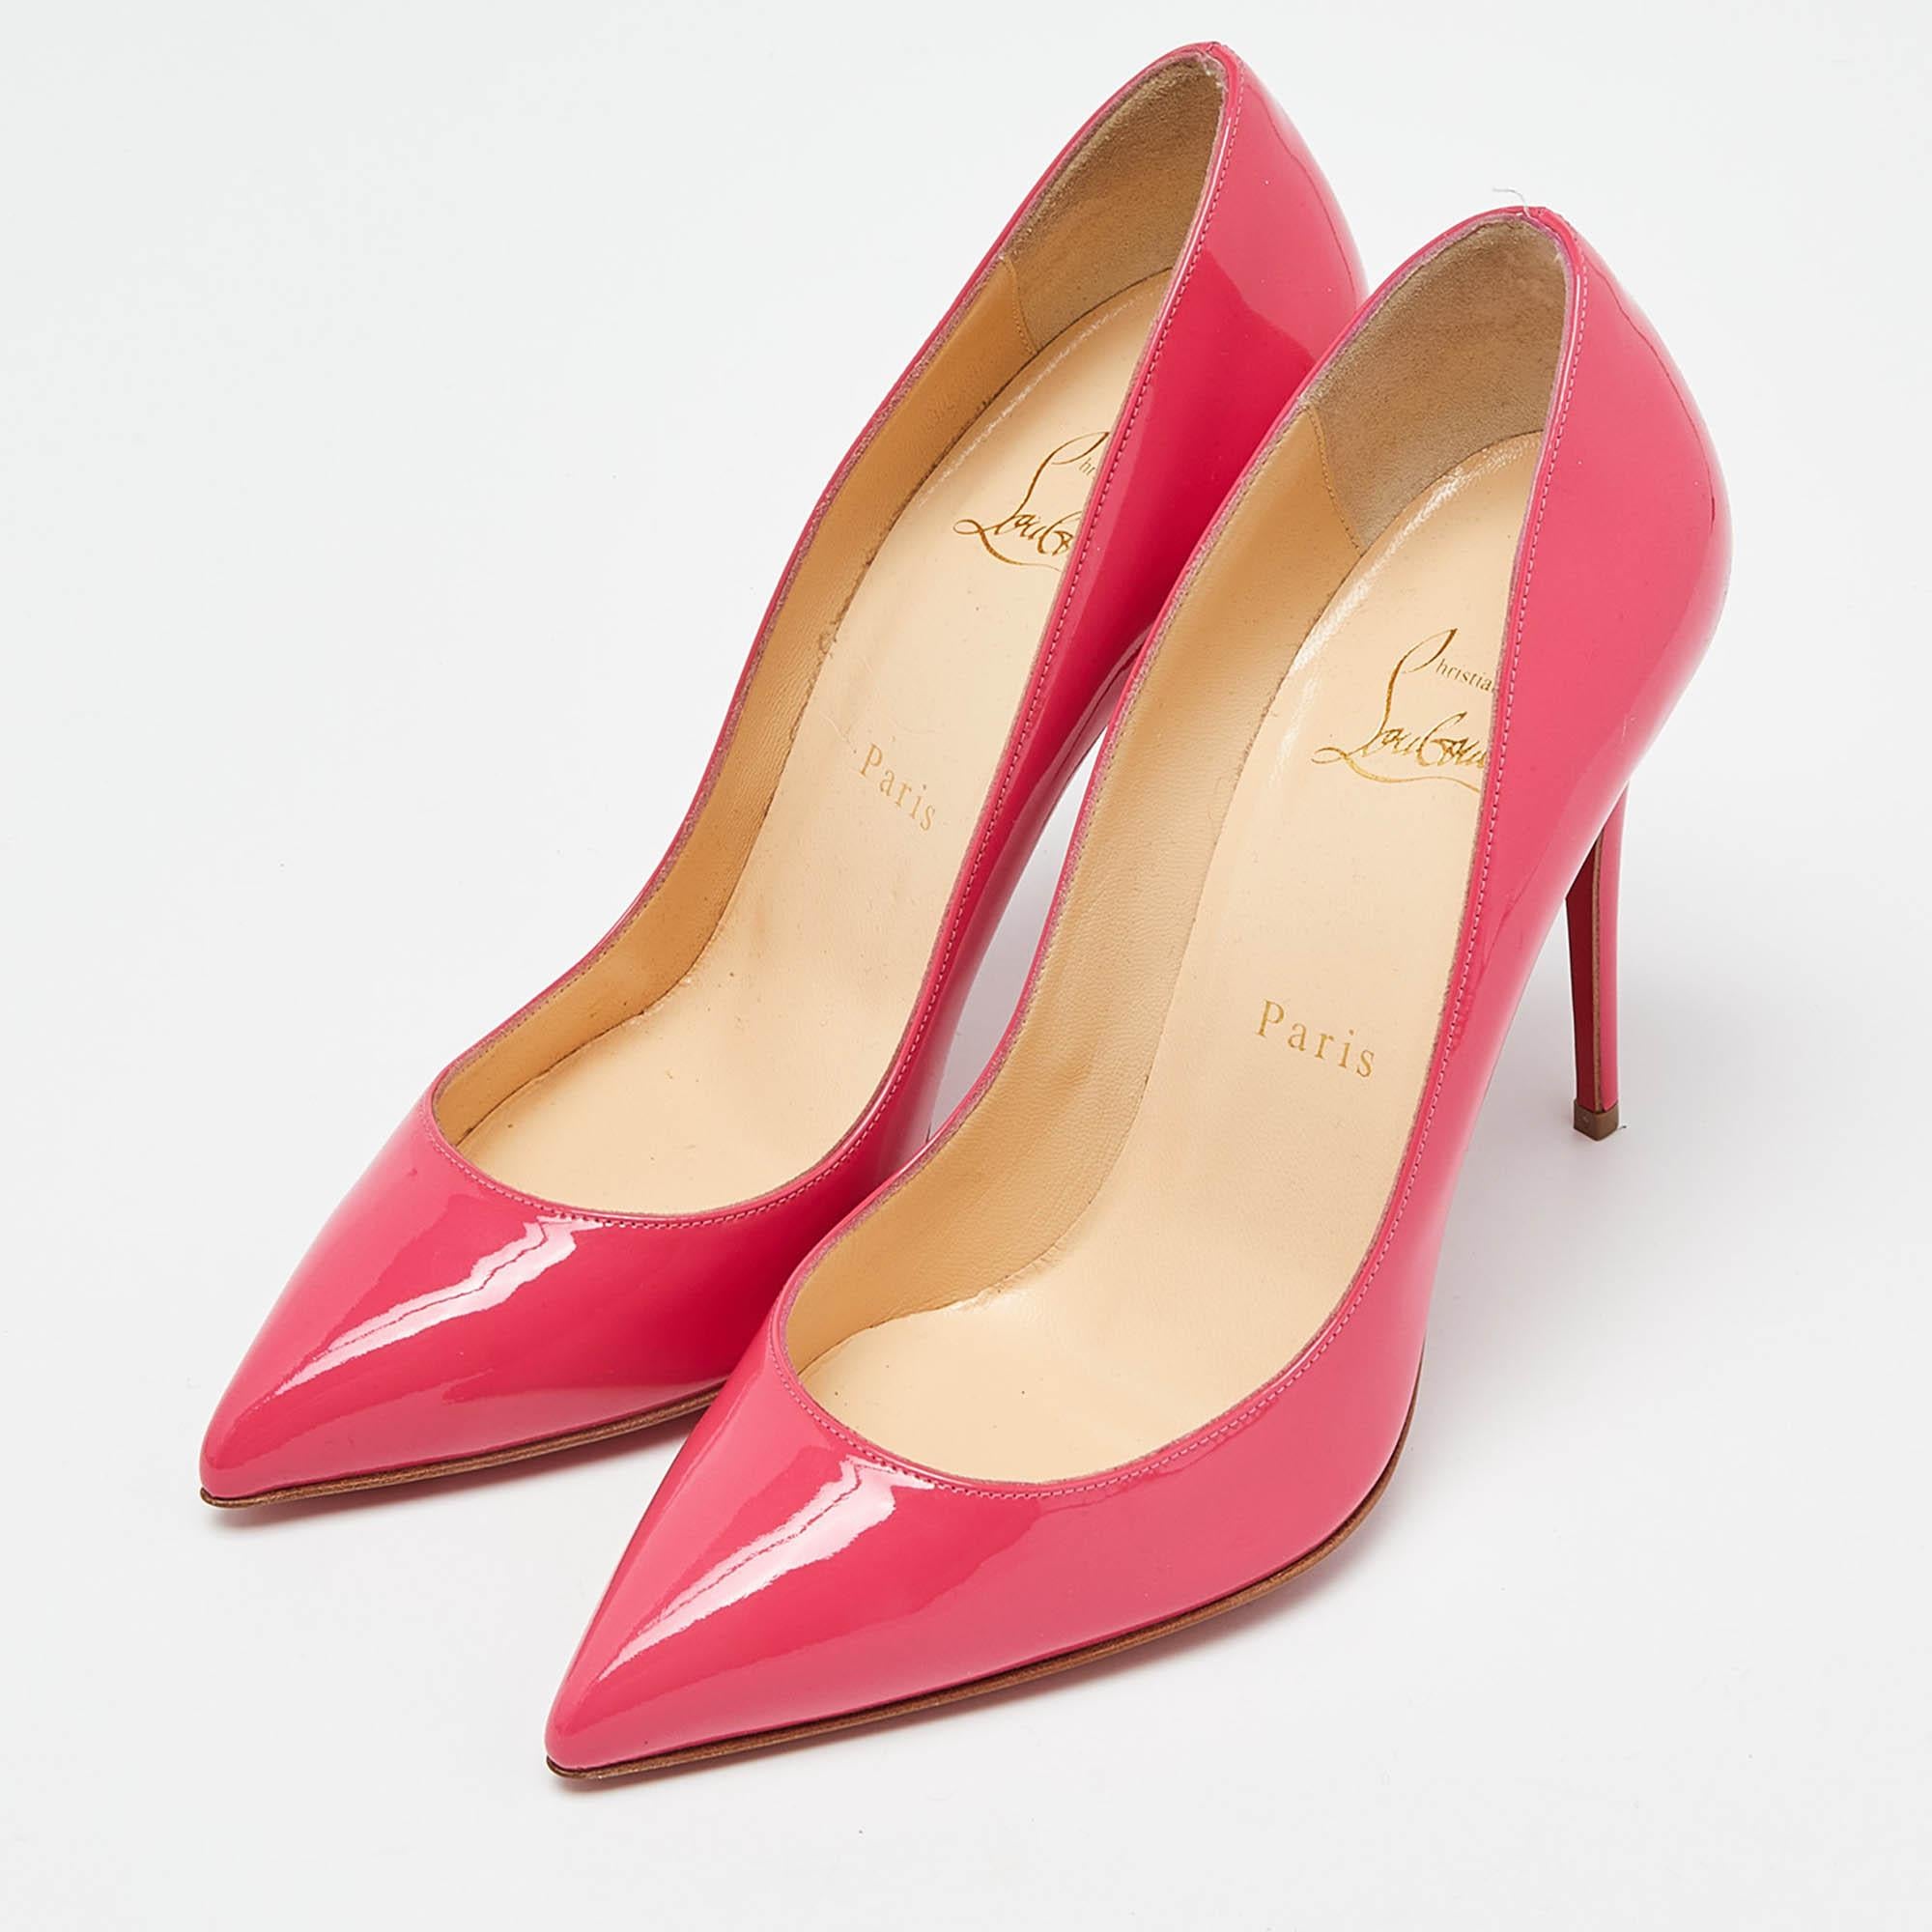 Christian Louboutin Pink Patent Leather Pigalle Pumps Size 38 For Sale 3